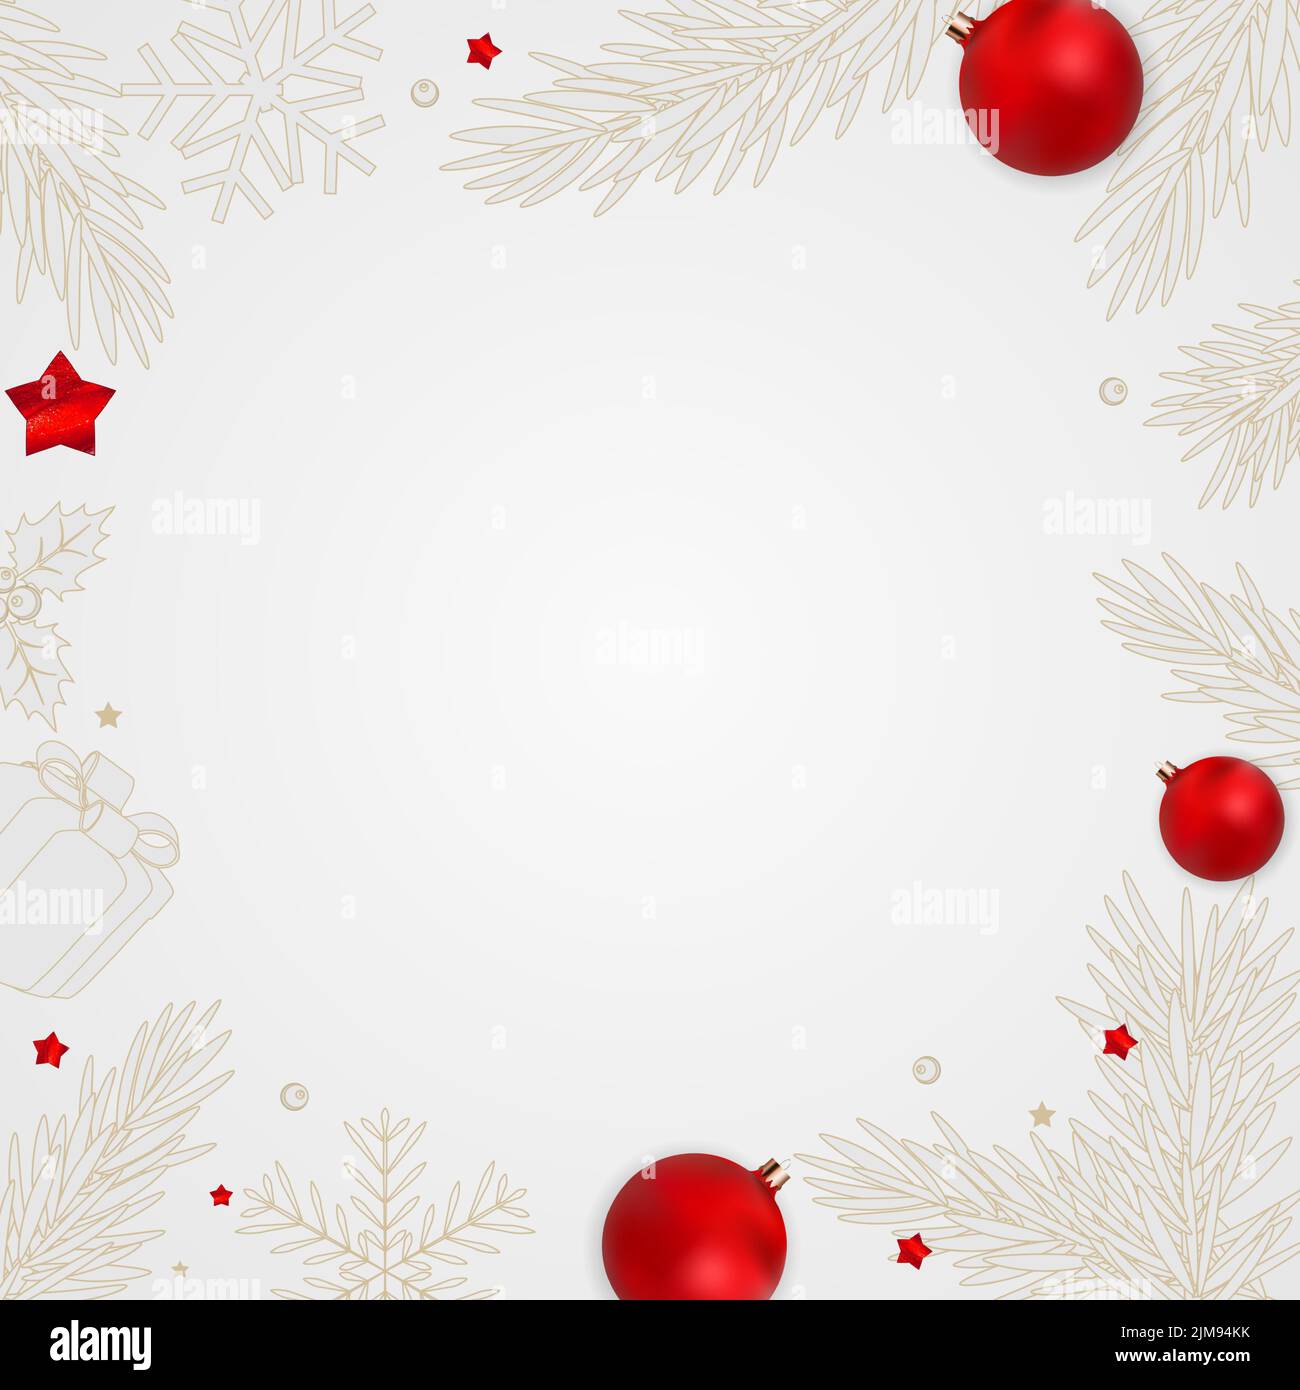 Merry Christmas and Happy New Year Greeting Card. Stock Vector